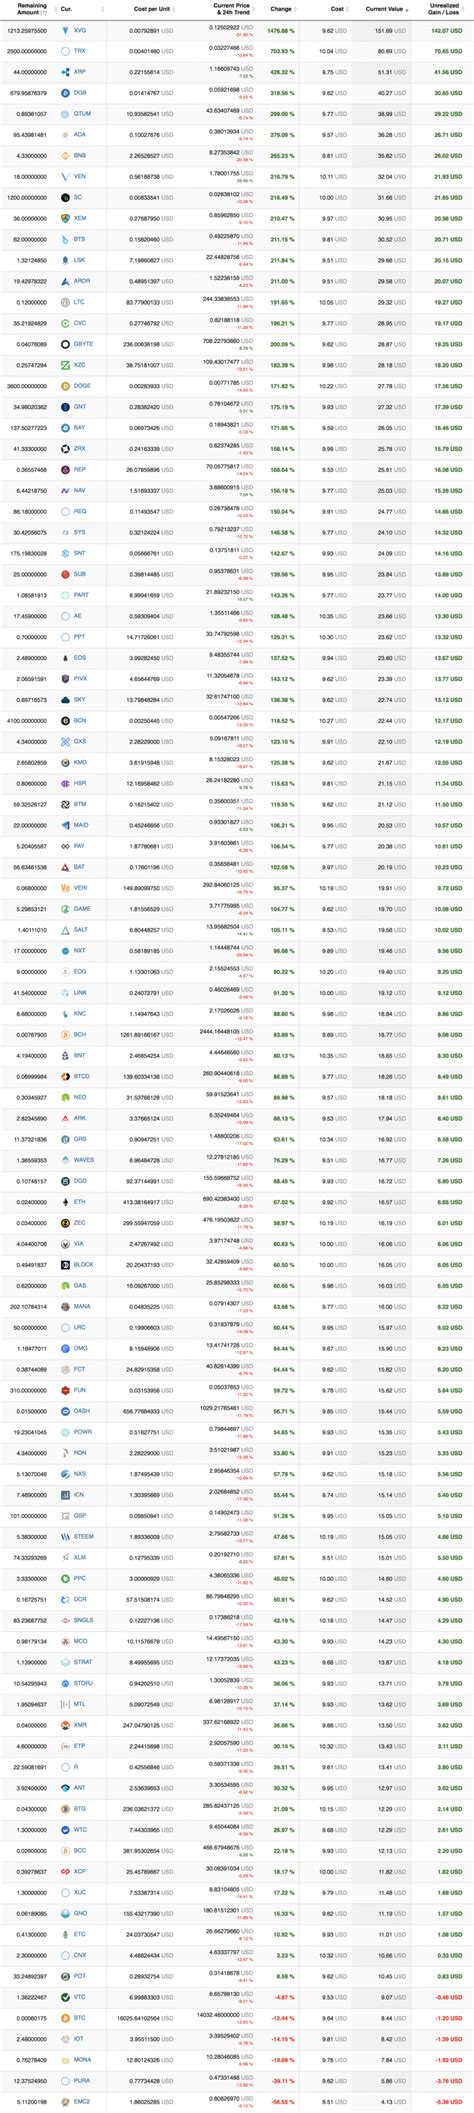 Day 20 Top 100 Usd Buy And Hold 100 Crypto